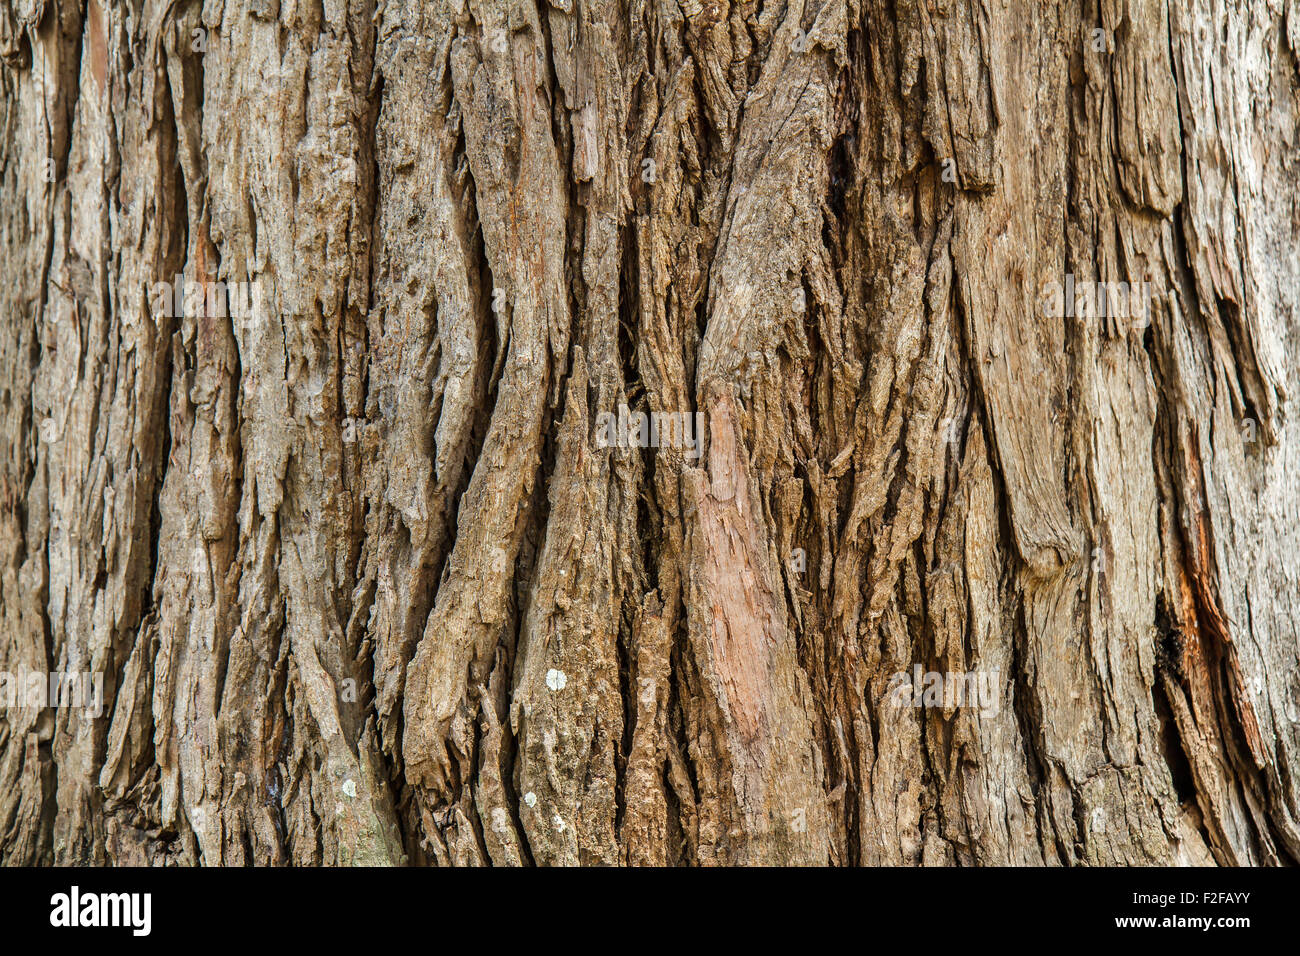 Abstract bark background Stock Photo